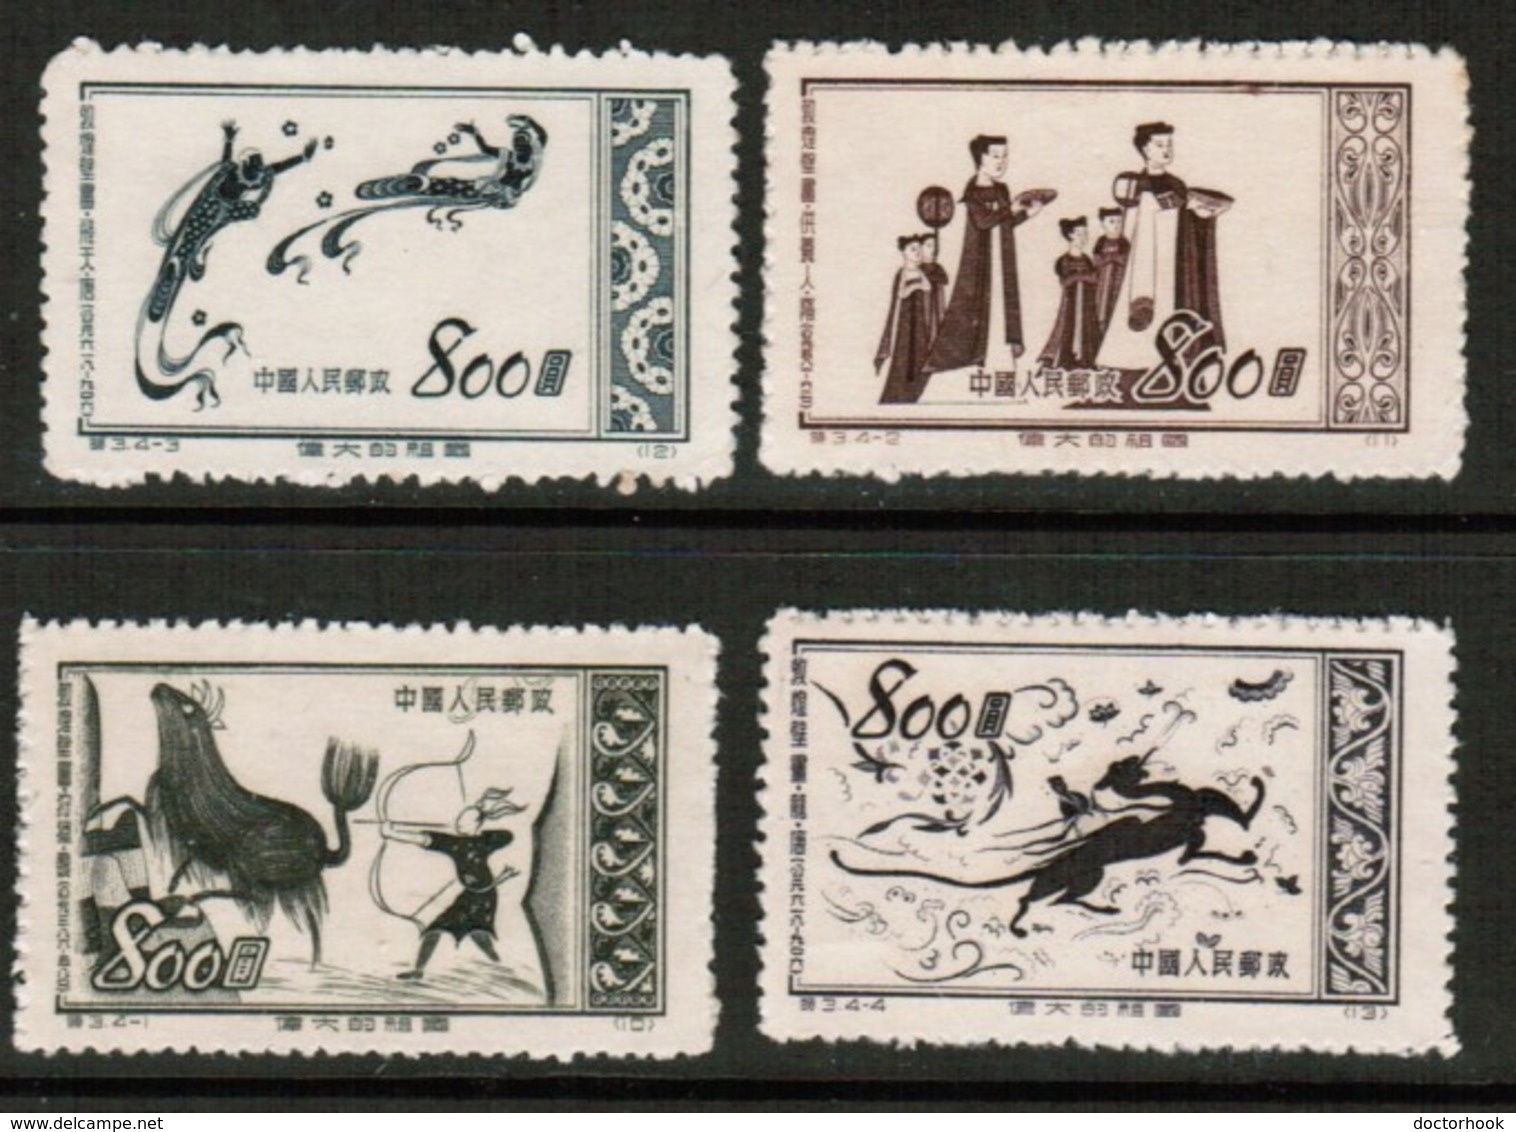 PEOPLES REPUBLIC Of CHINA  Scott # 151-4* VF UNUSED NO GUM AS ISSUED (Stamp Scan # 508) - Nuevos